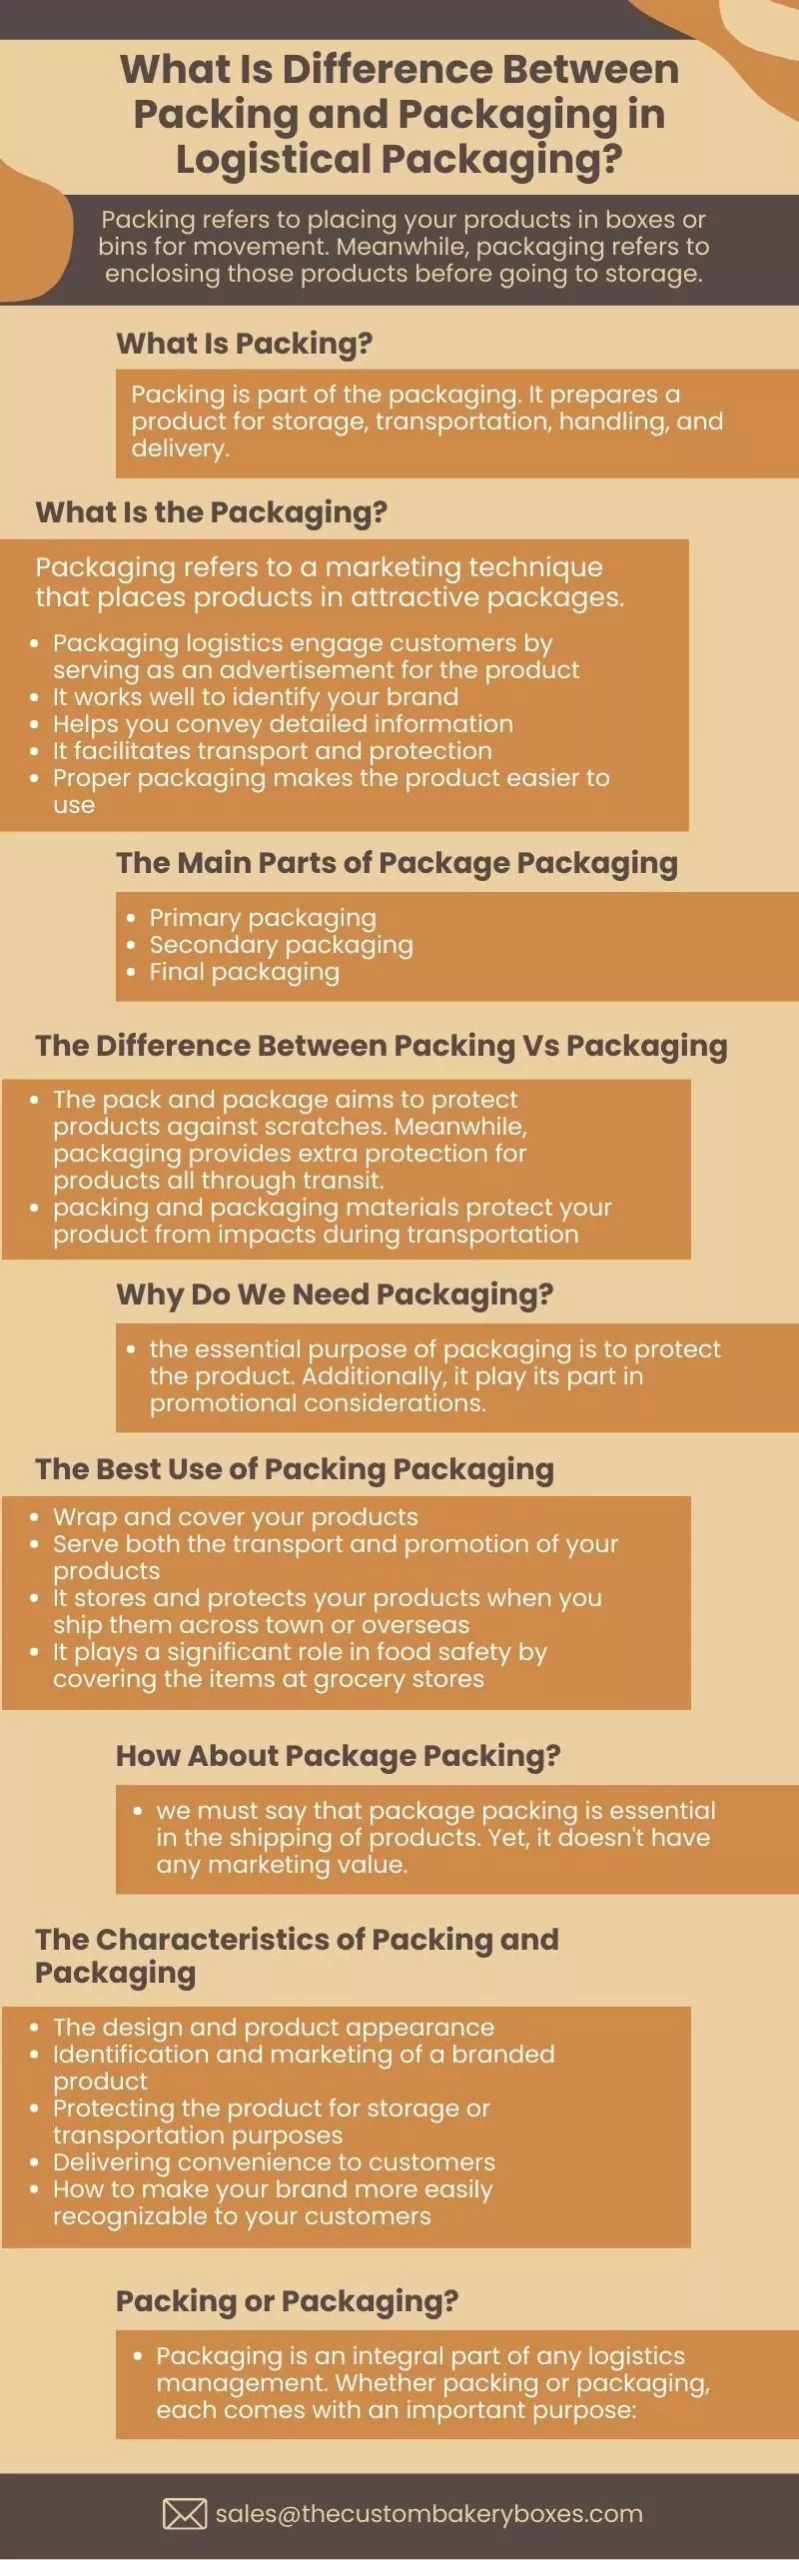 What is the difference Between Packing and Packaging in Logistical Packaging